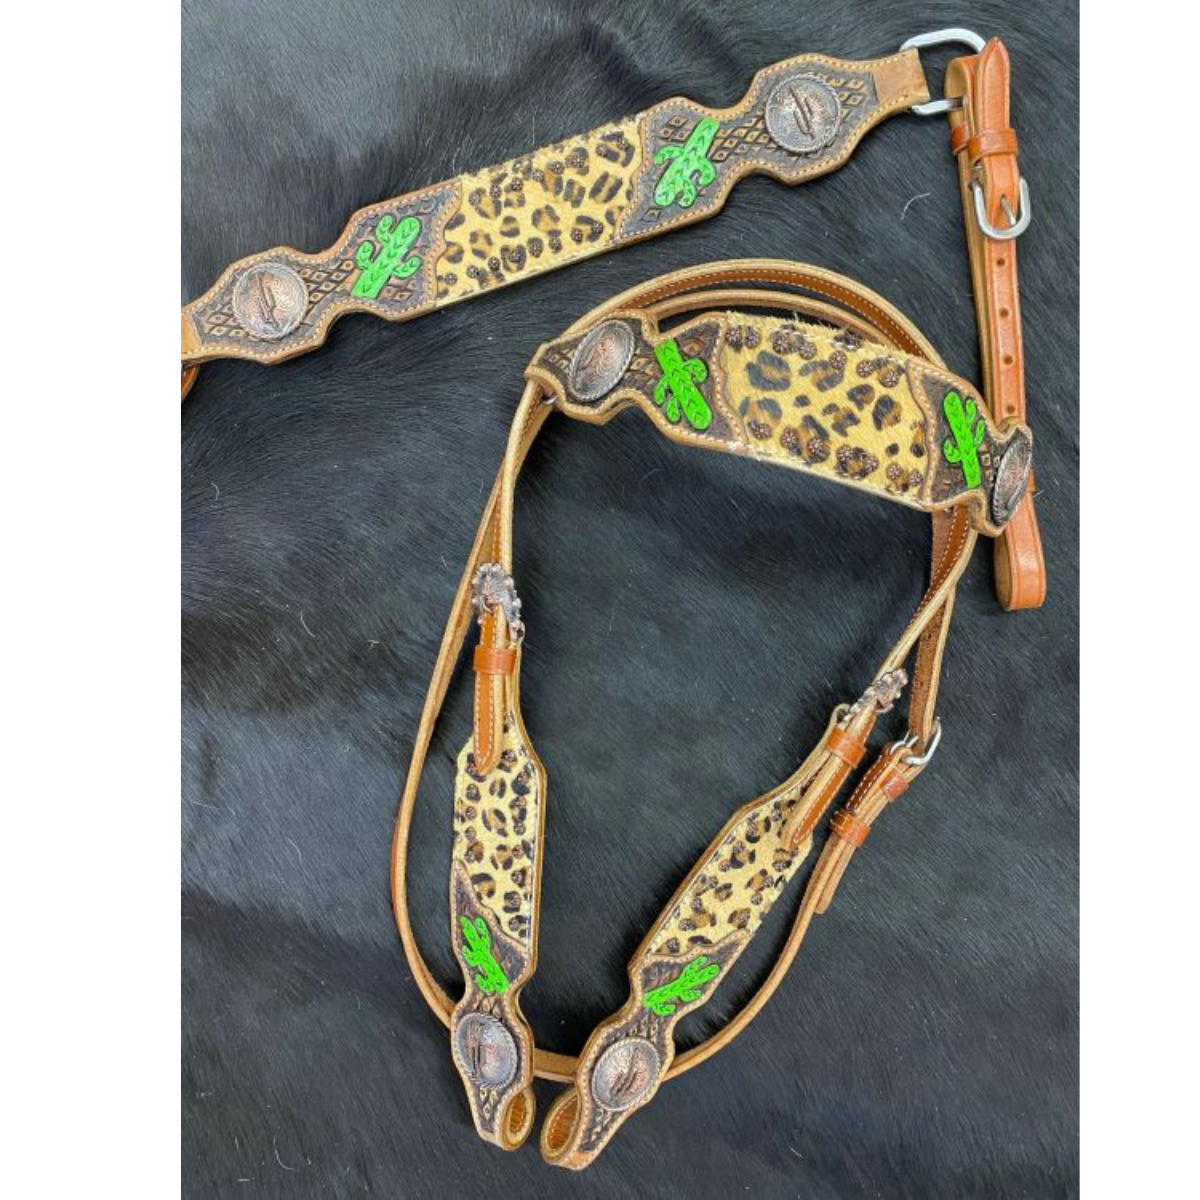 Showman ® Cheetah headstall and breast collar set with painted cactus accents. - Double T Saddles